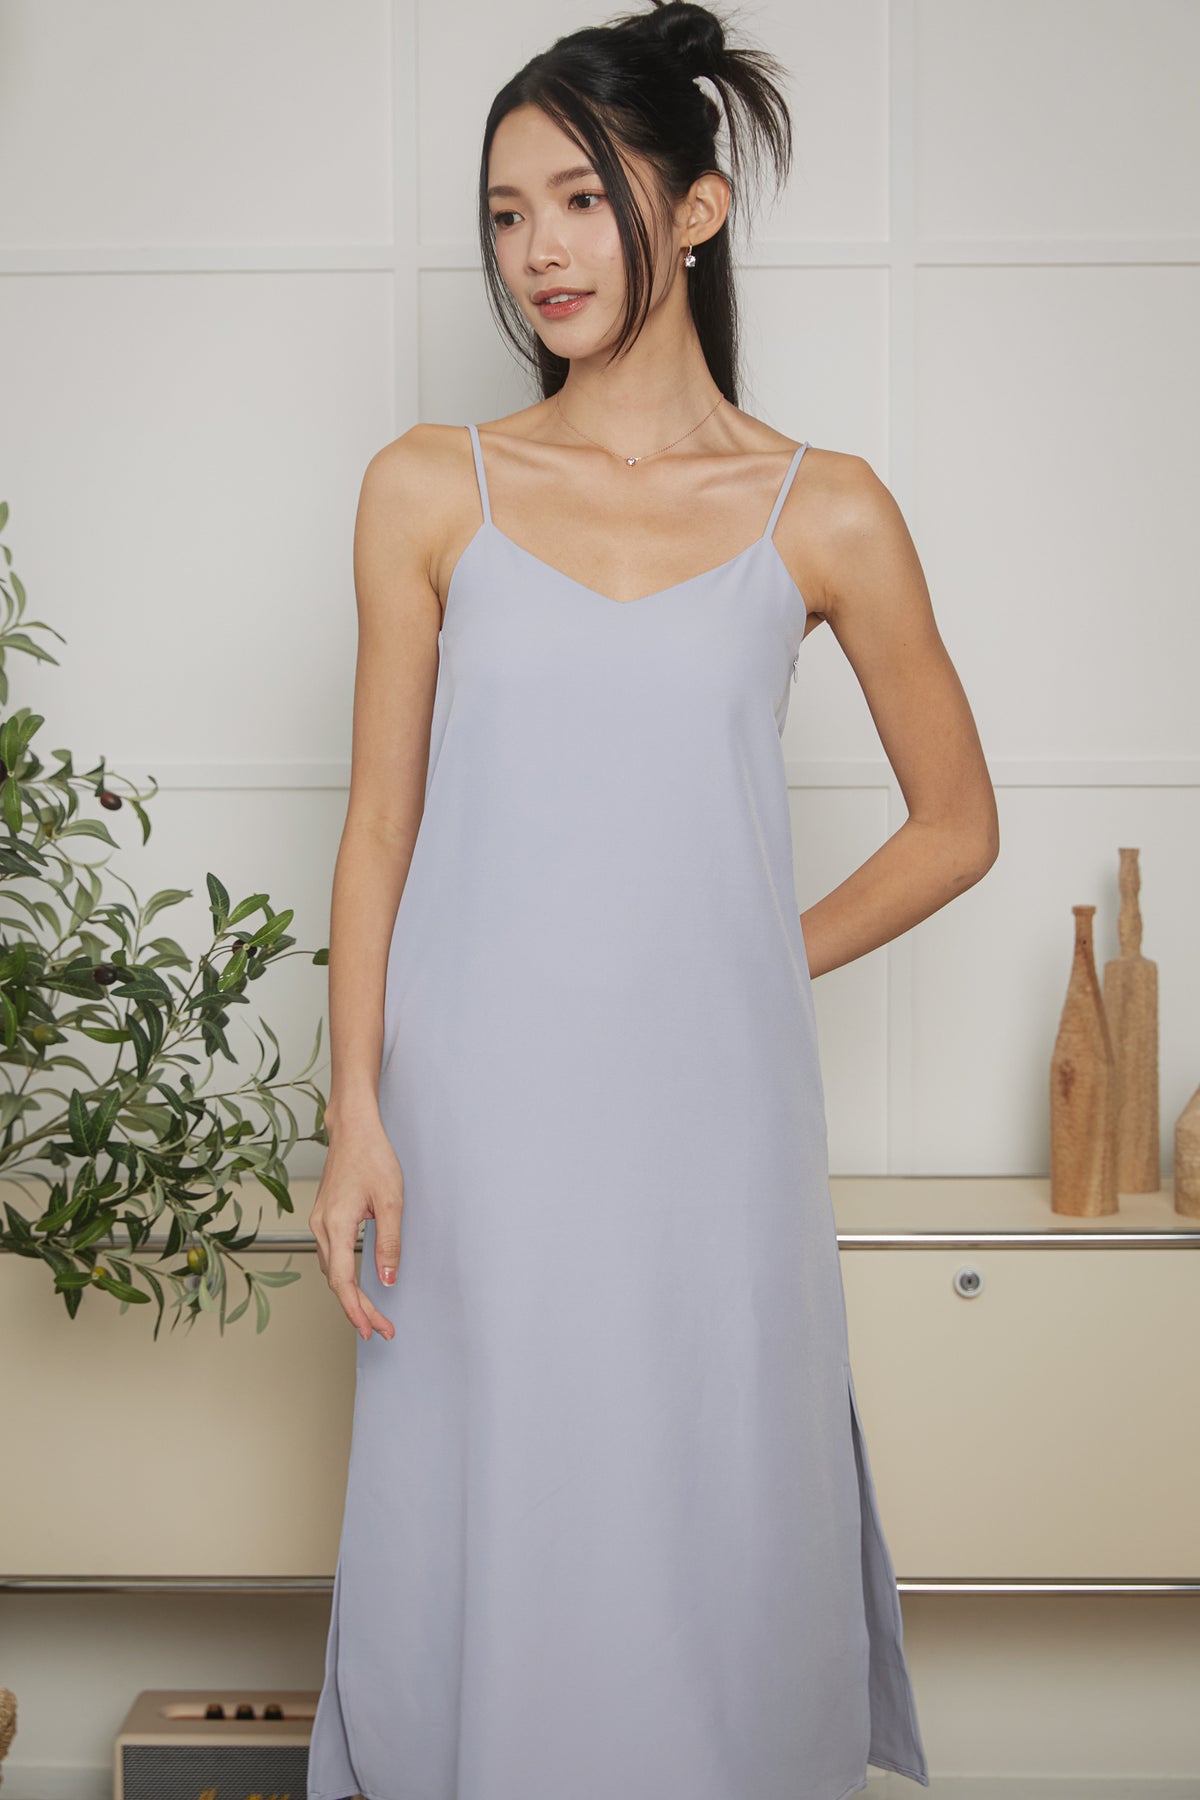 Two-Way Side Slits Strappy Dress in Ash Blue